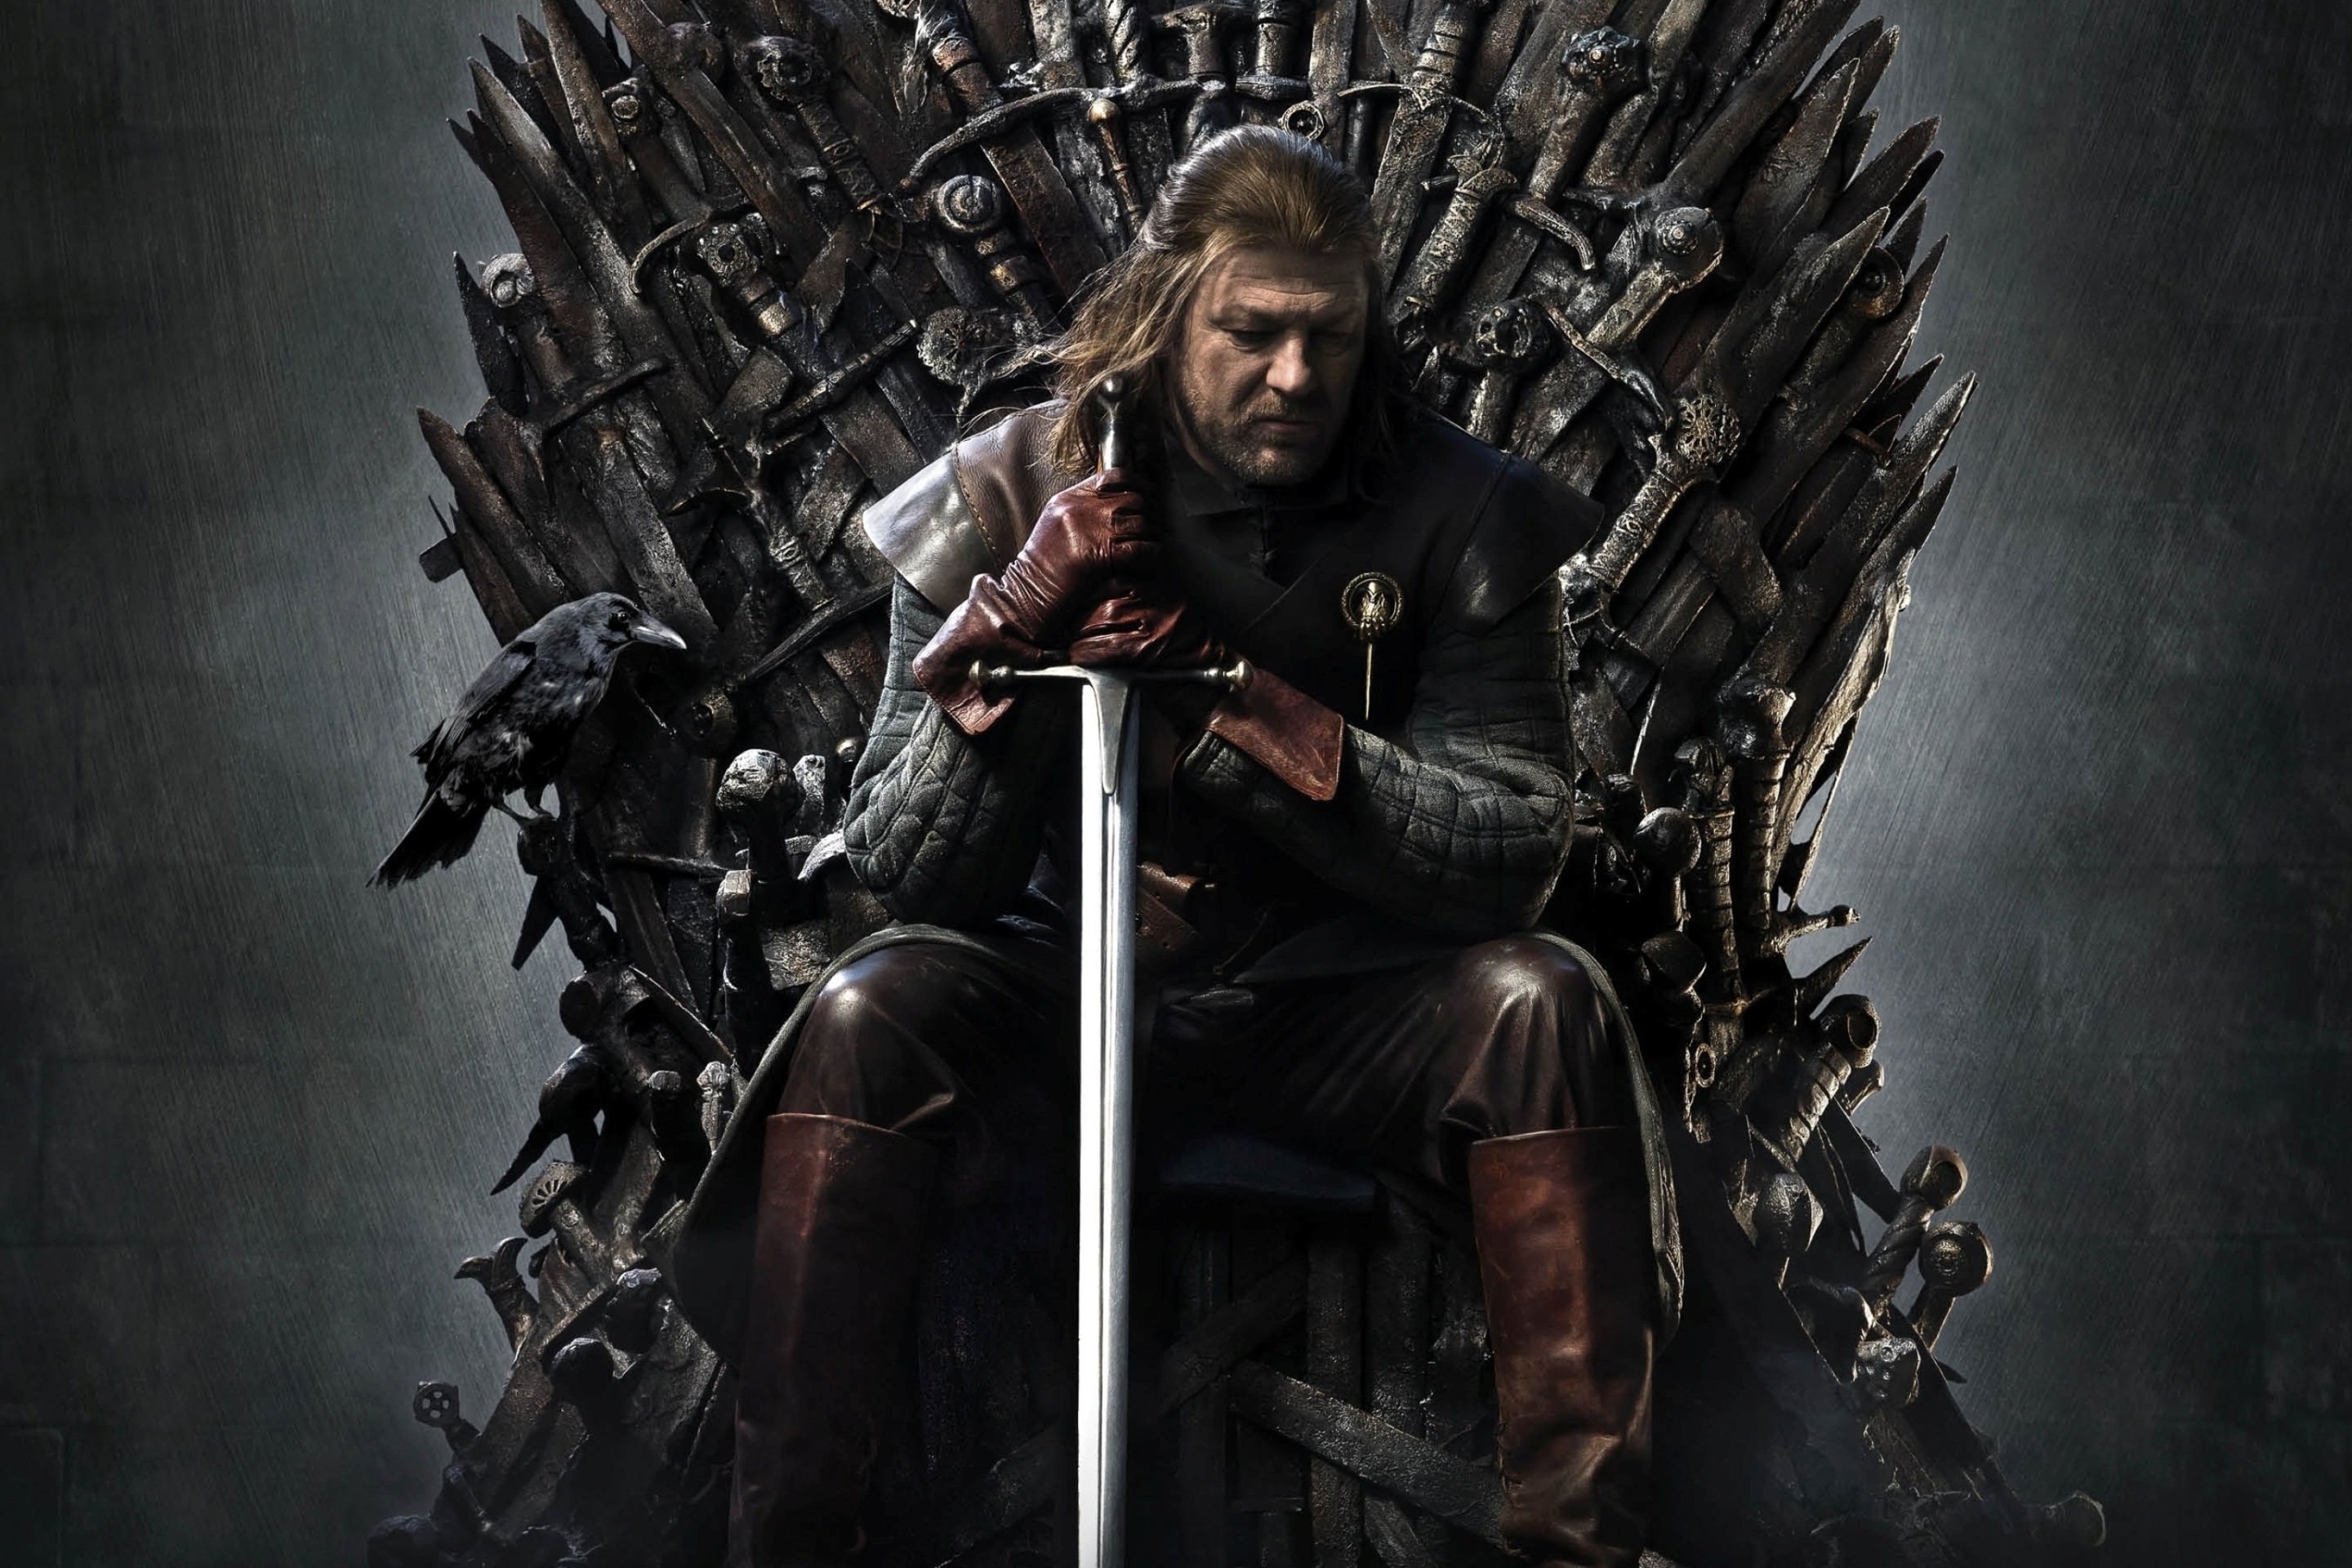 Das Game Of Thrones A Song of Ice and Fire with Ned Star Wallpaper 2880x1920